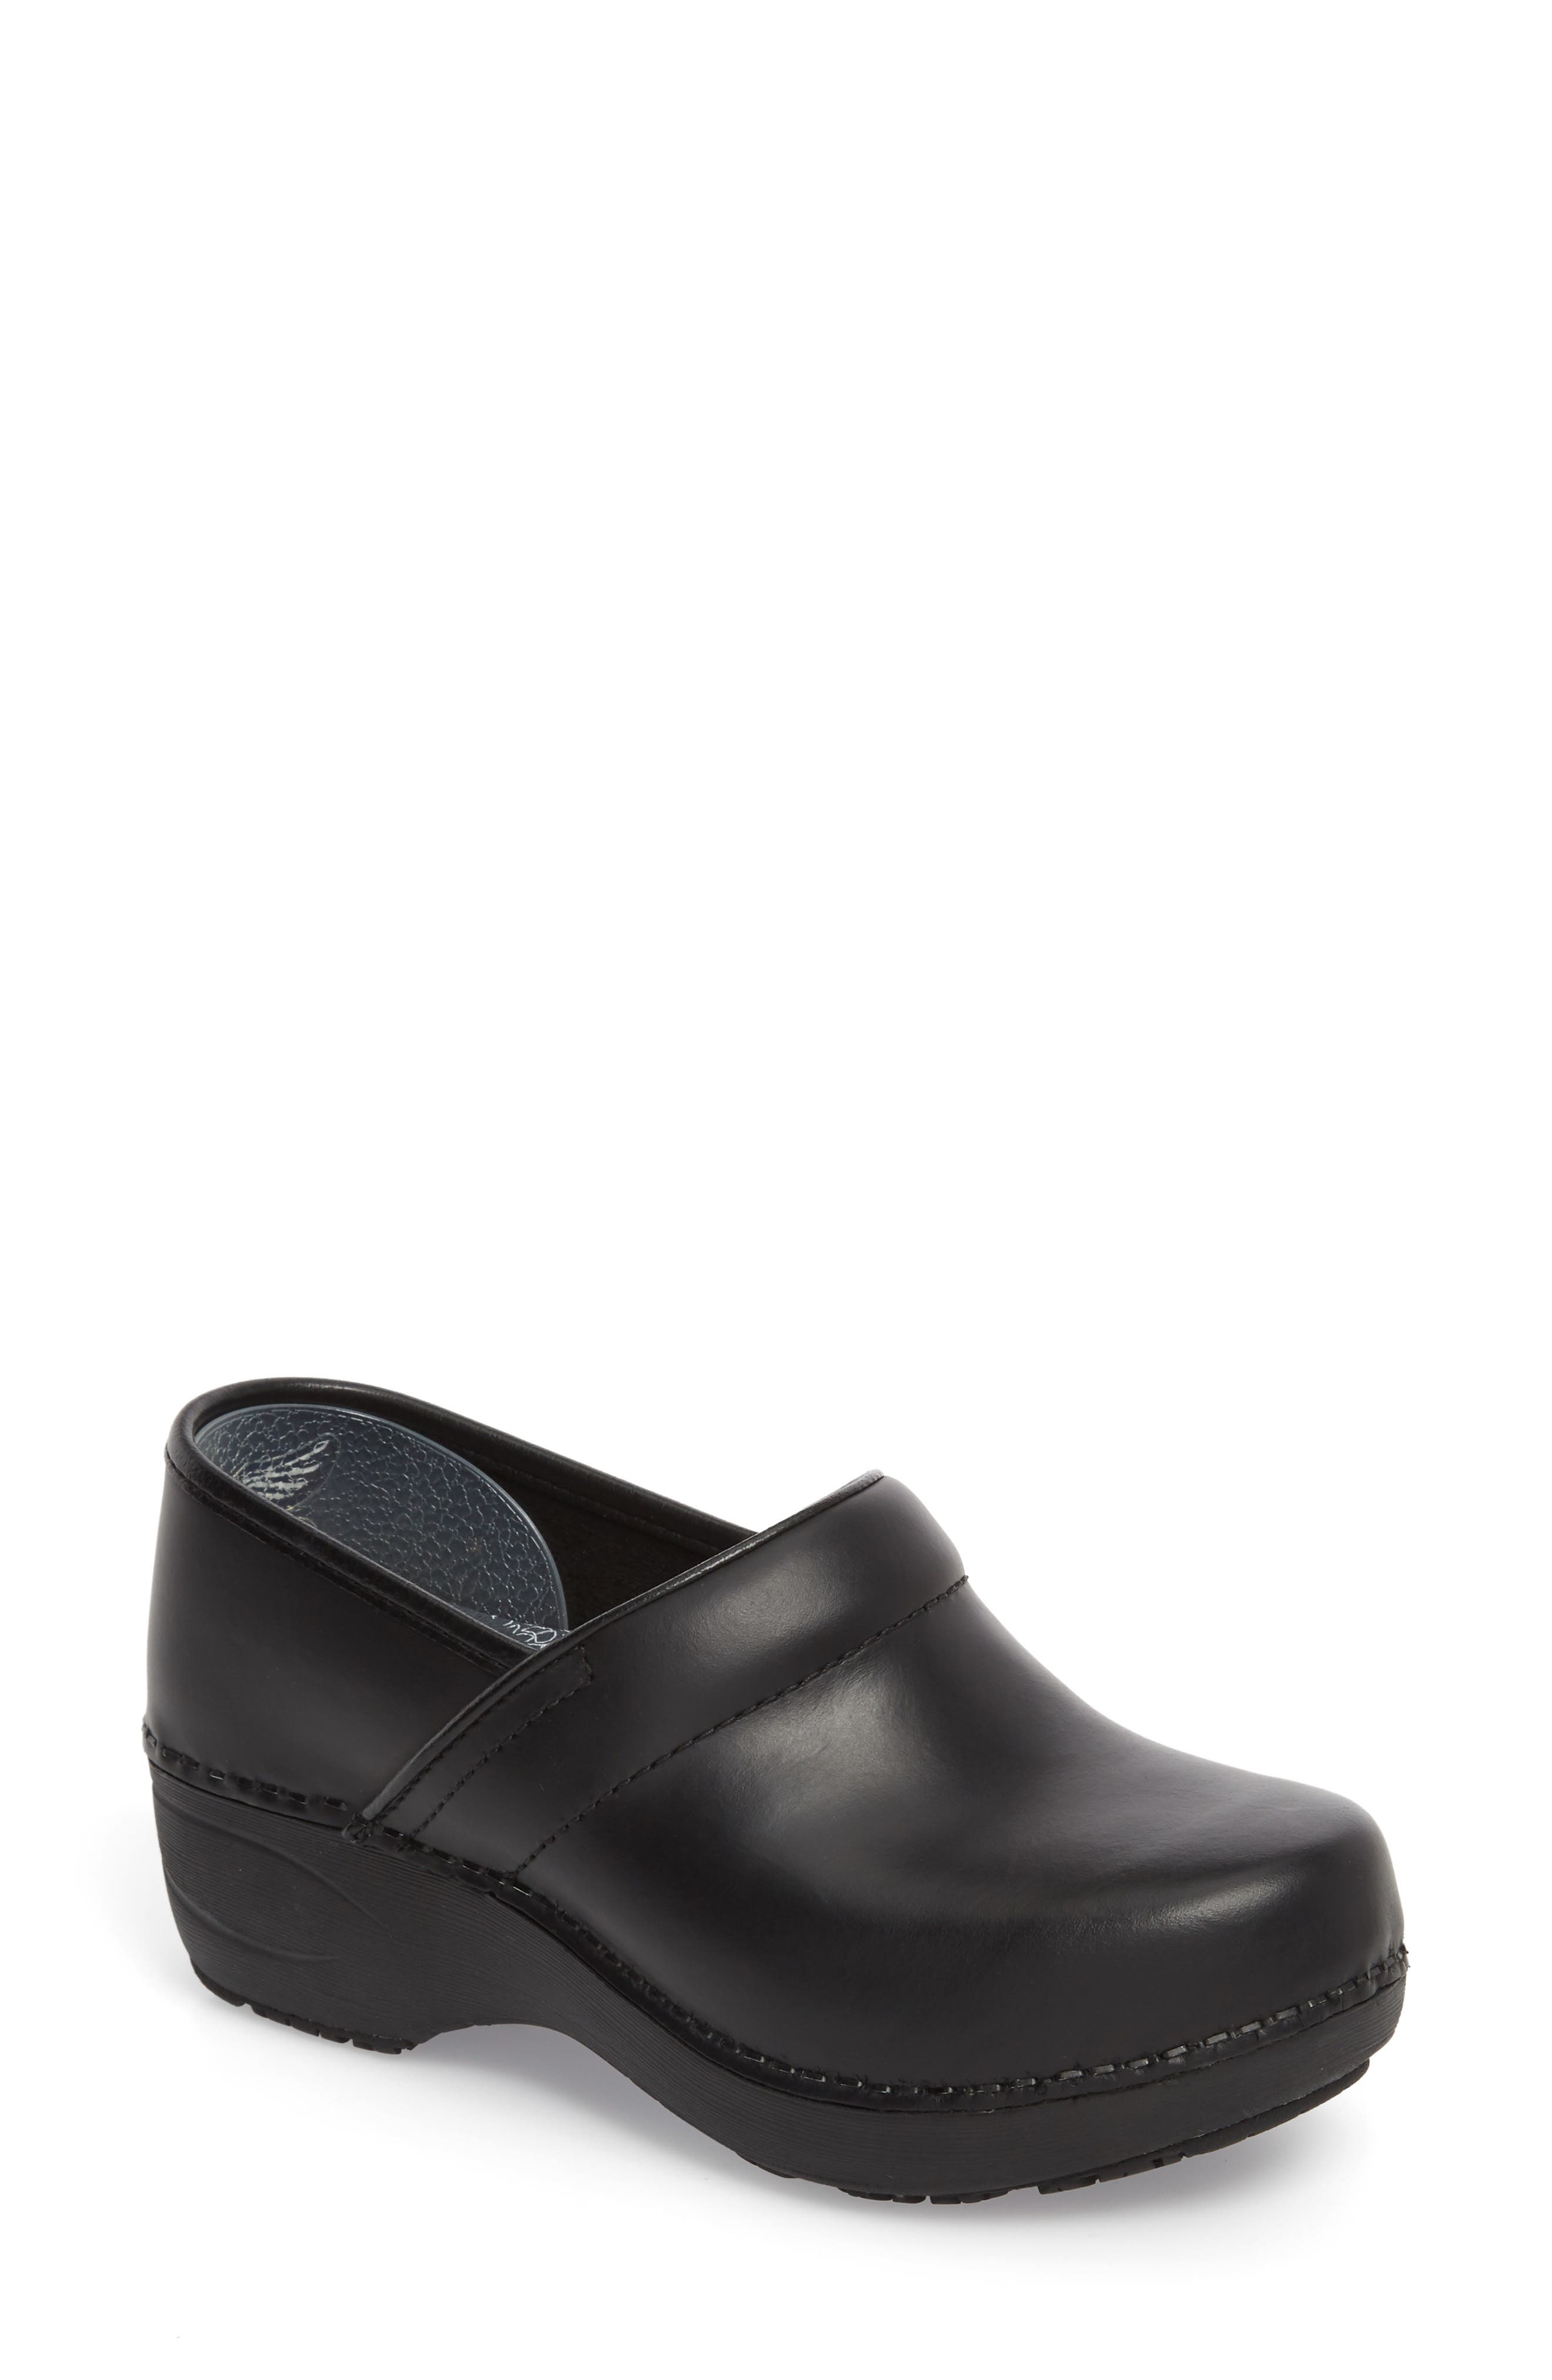 nordstrom womens clogs